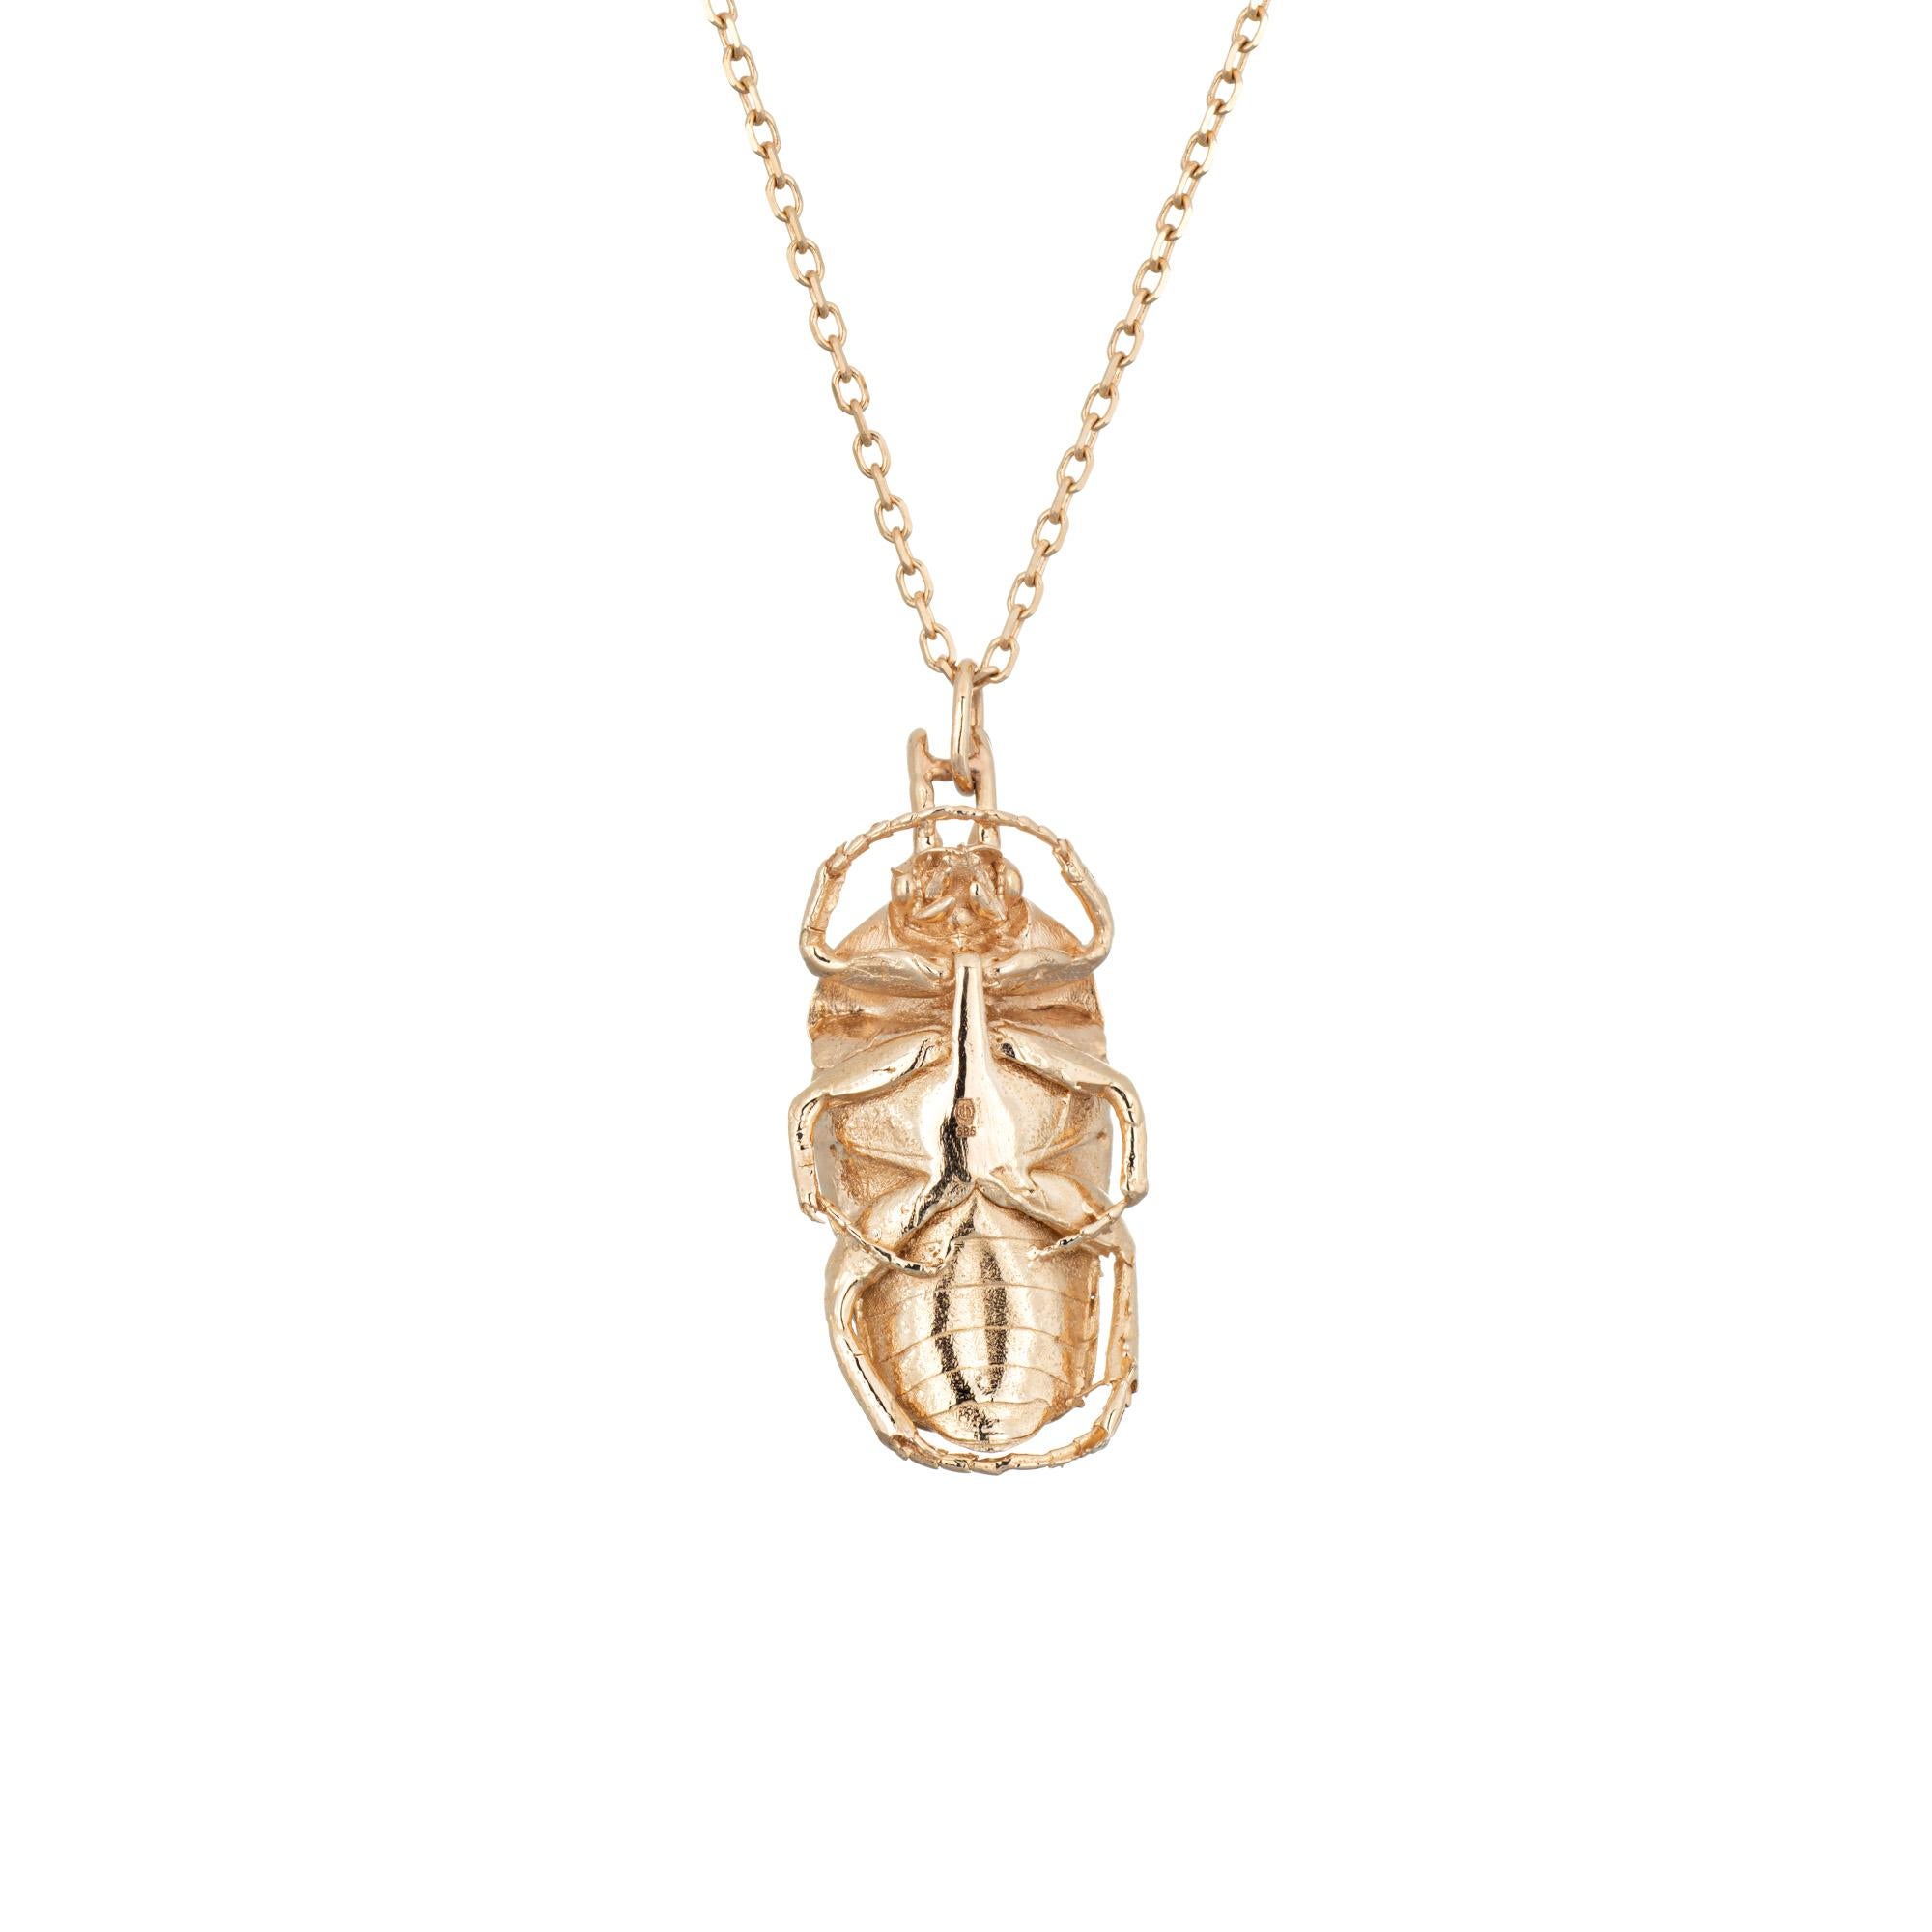 Stylish and finely detailed contemporary diamond set scarab necklace crafted in 14 karat white gold. 

Trillion cut diamond is estimated at 0.06 carats (estimated at I-J color and I1 clarity).  

The scarab is a protective charm, promoting luck and